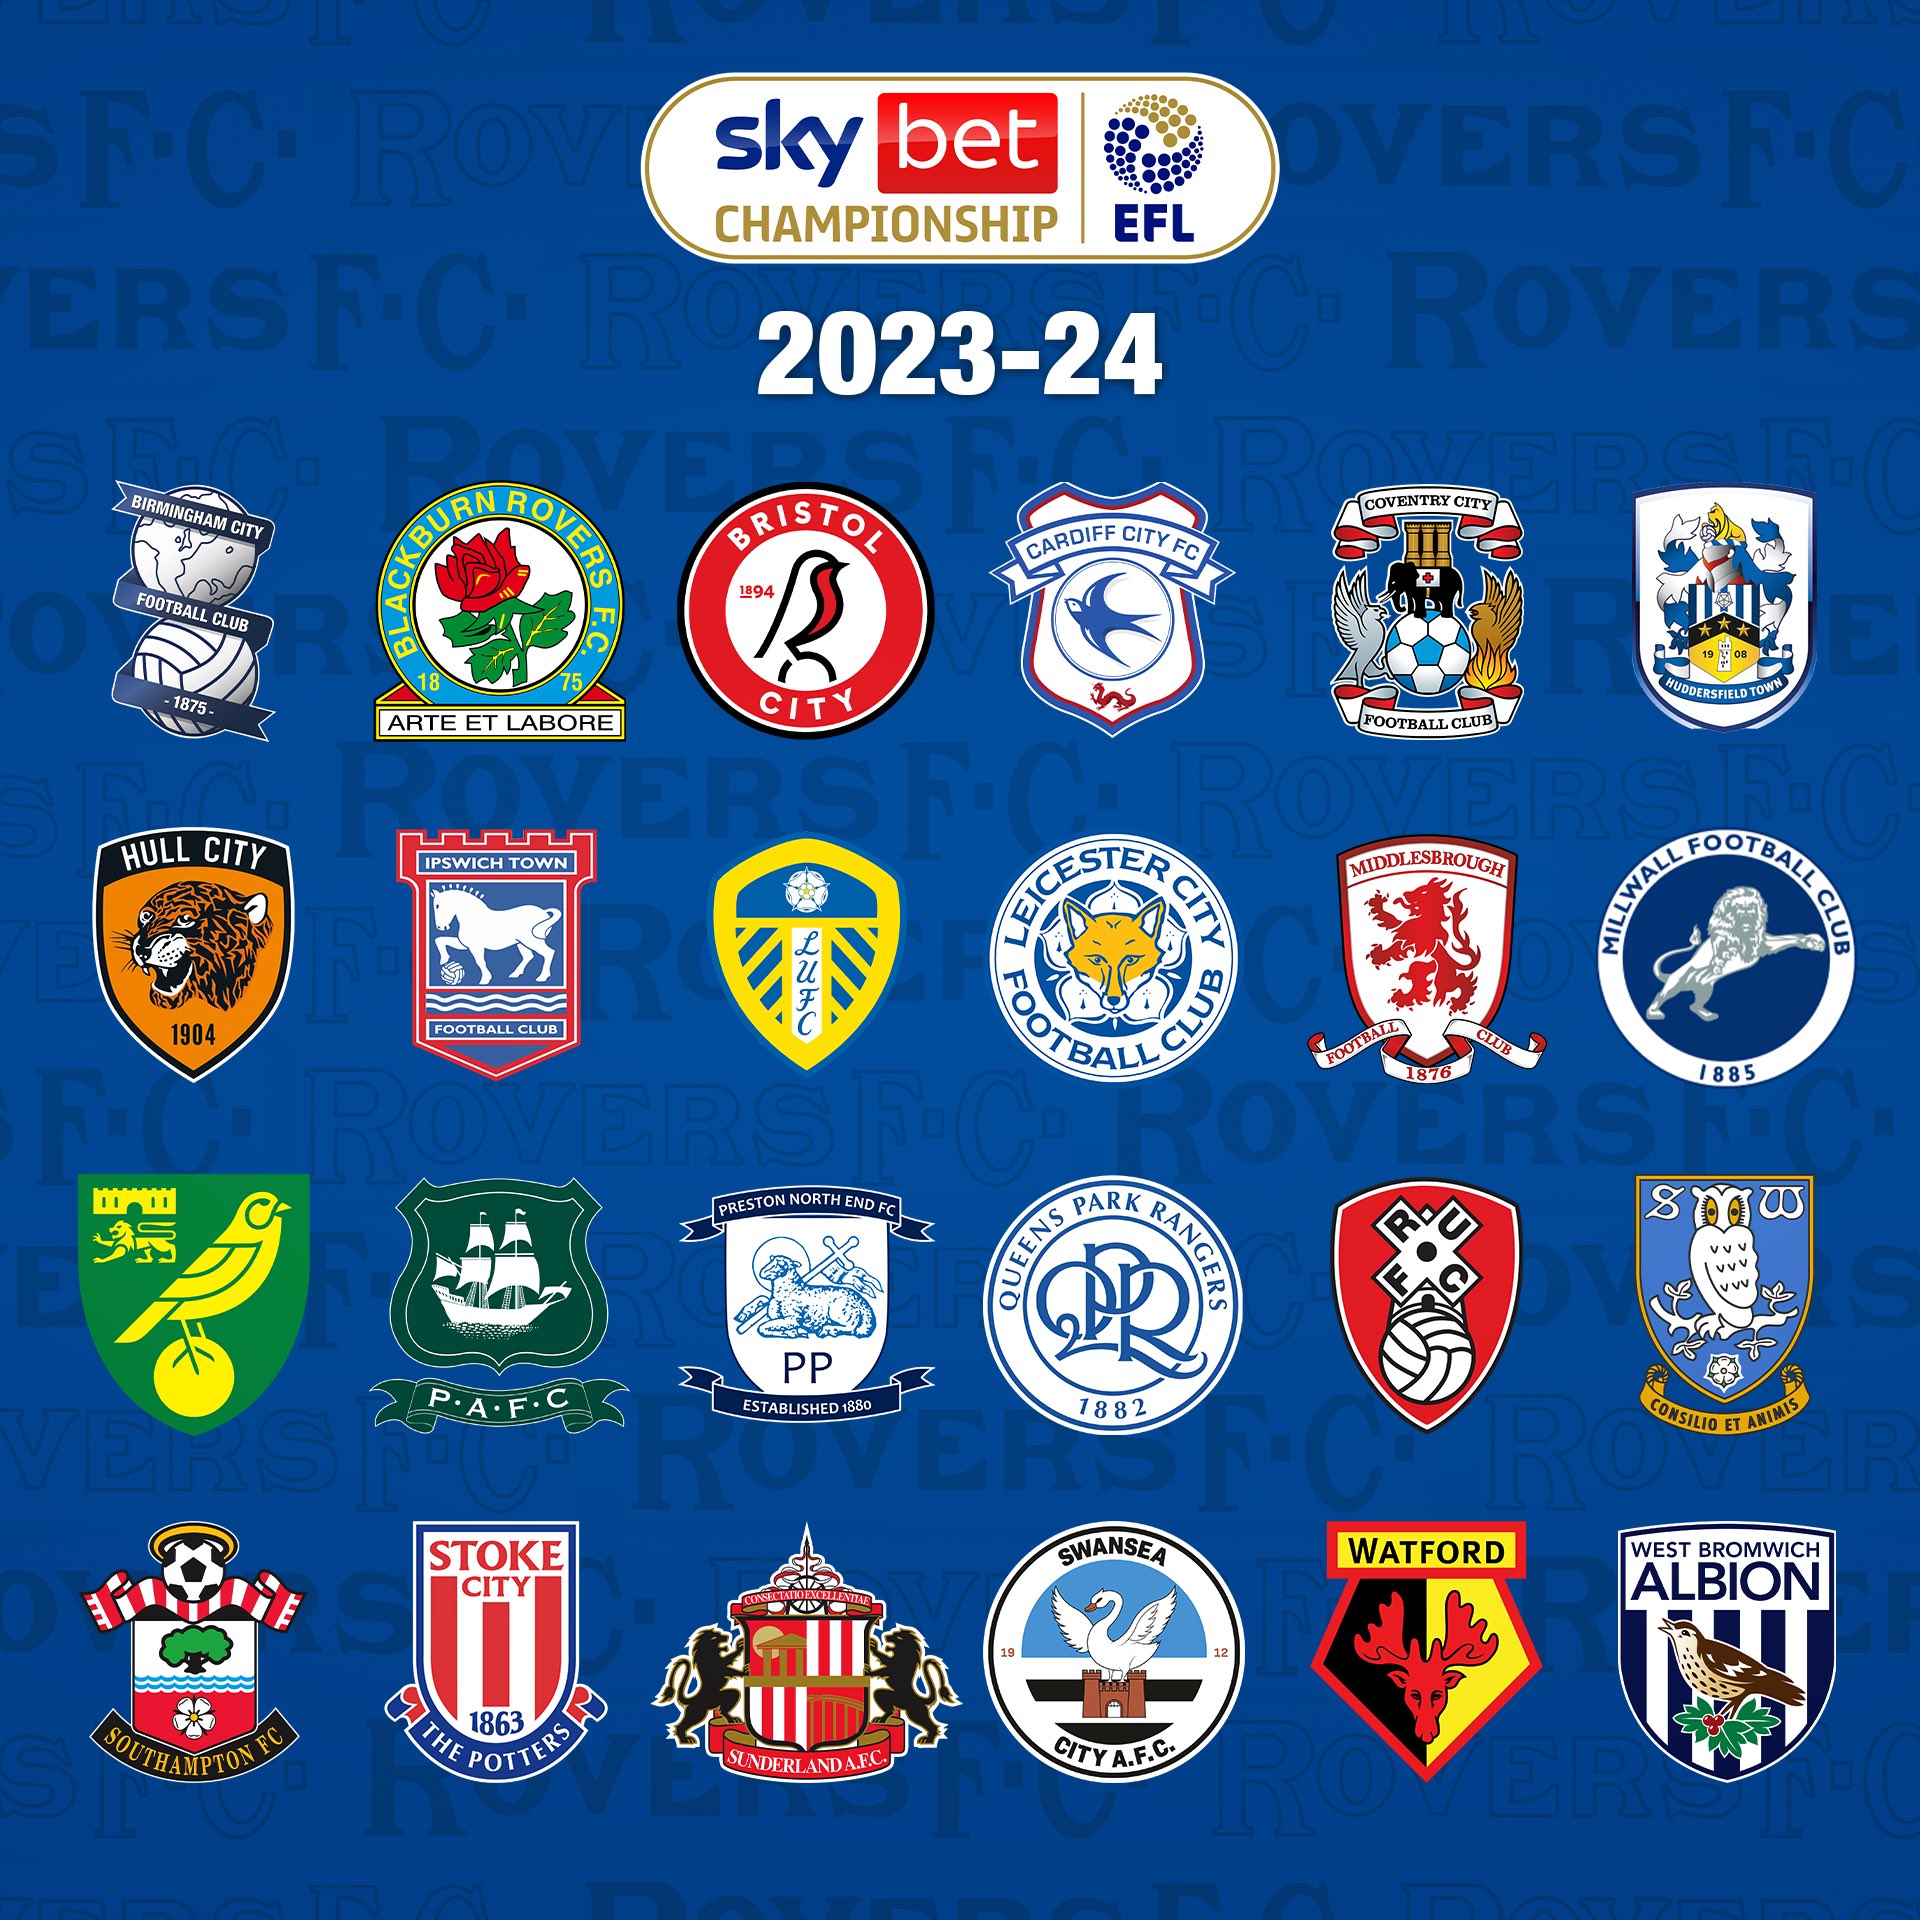 Twitter-এ Blackburn Rovers: "⏩ We now know the complete @SkyBetChamp lineup  for 2023/24. #Rovers 🔵⚪️ https://t.co/3KYIsuwIAz" / টুইটার